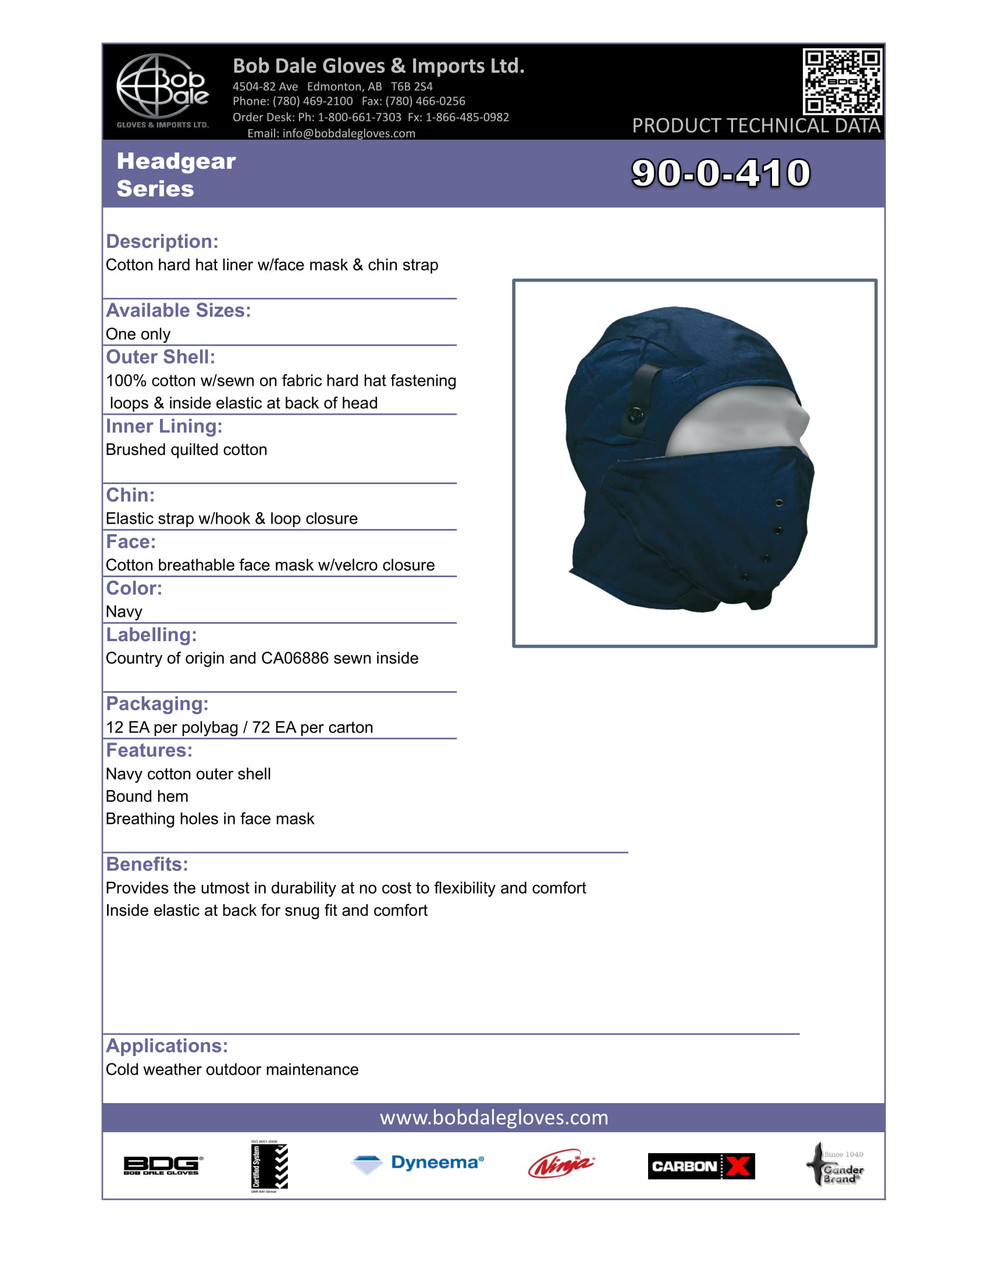 Hard Hat Liner Navy Quilted Cotton w/Face Mask  90-0-410